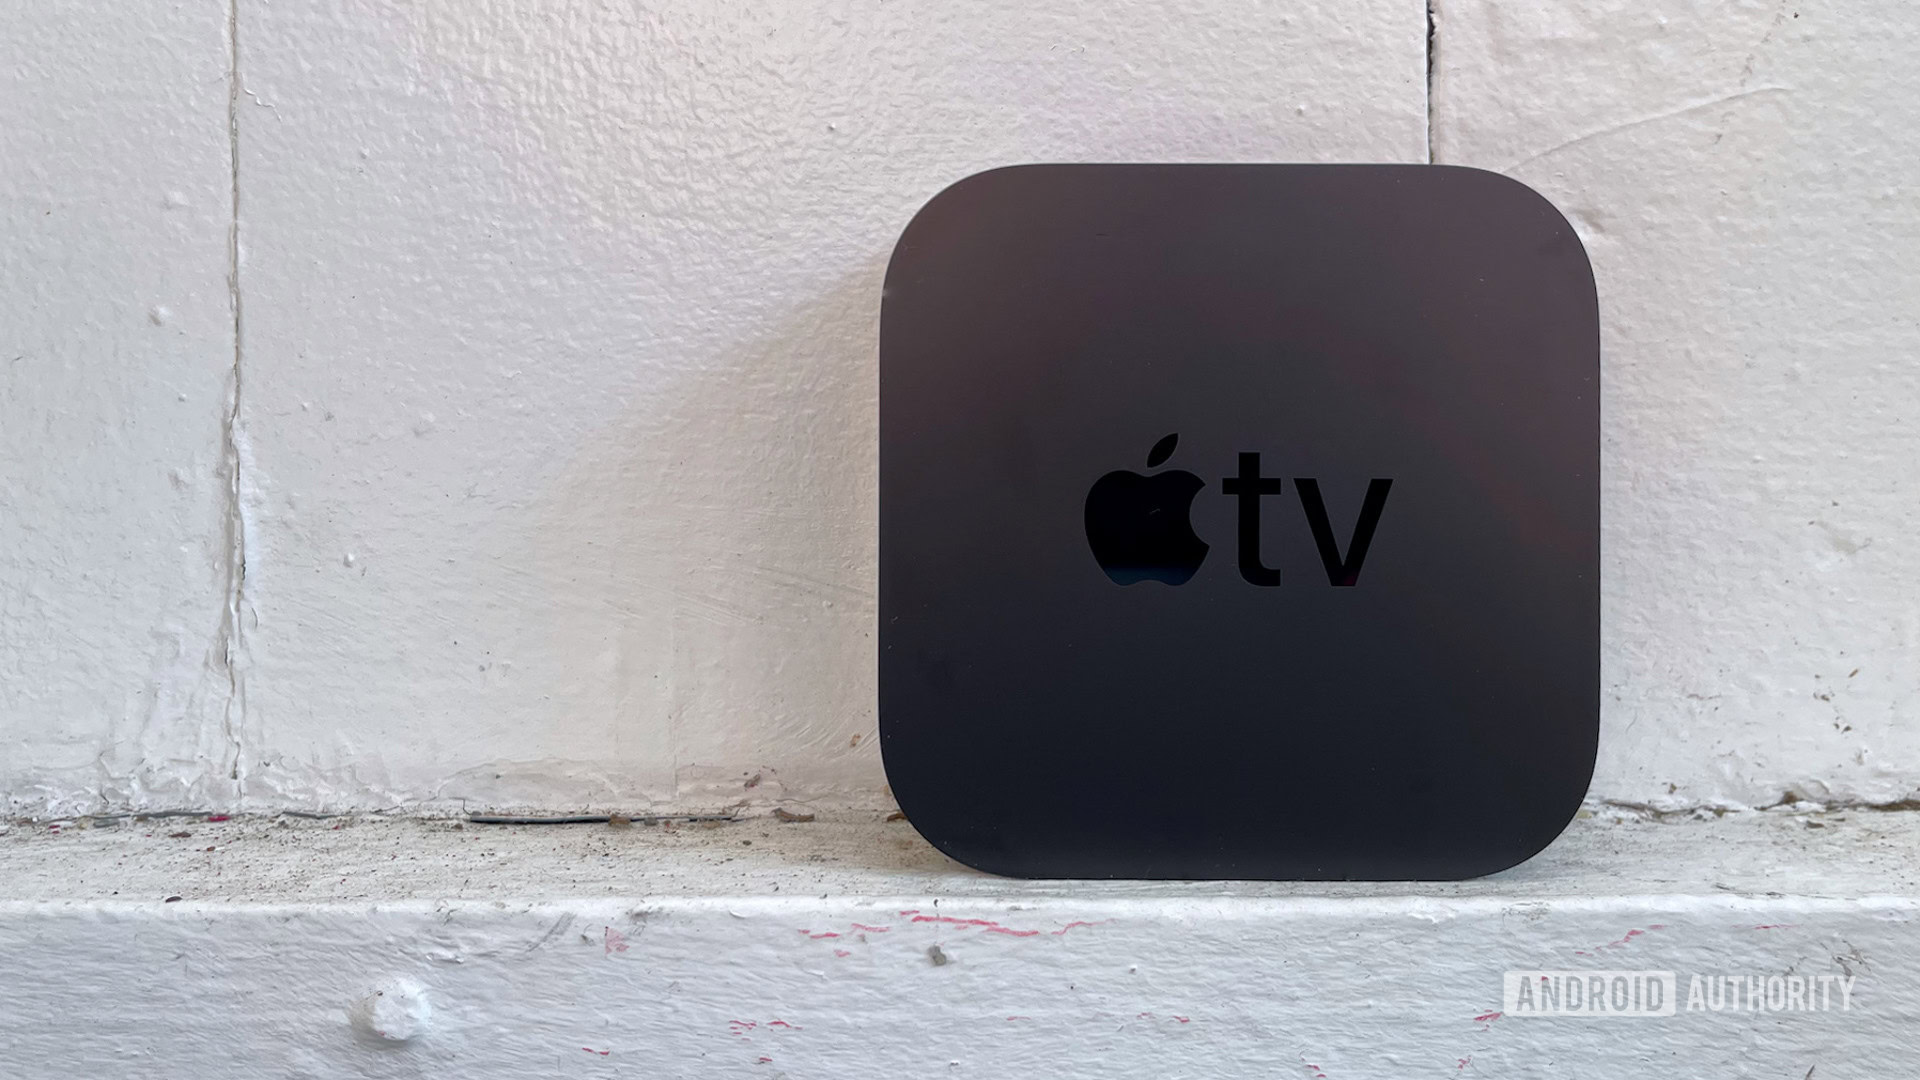 Got one of these Apple TVs? Say goodbye to Netflix support